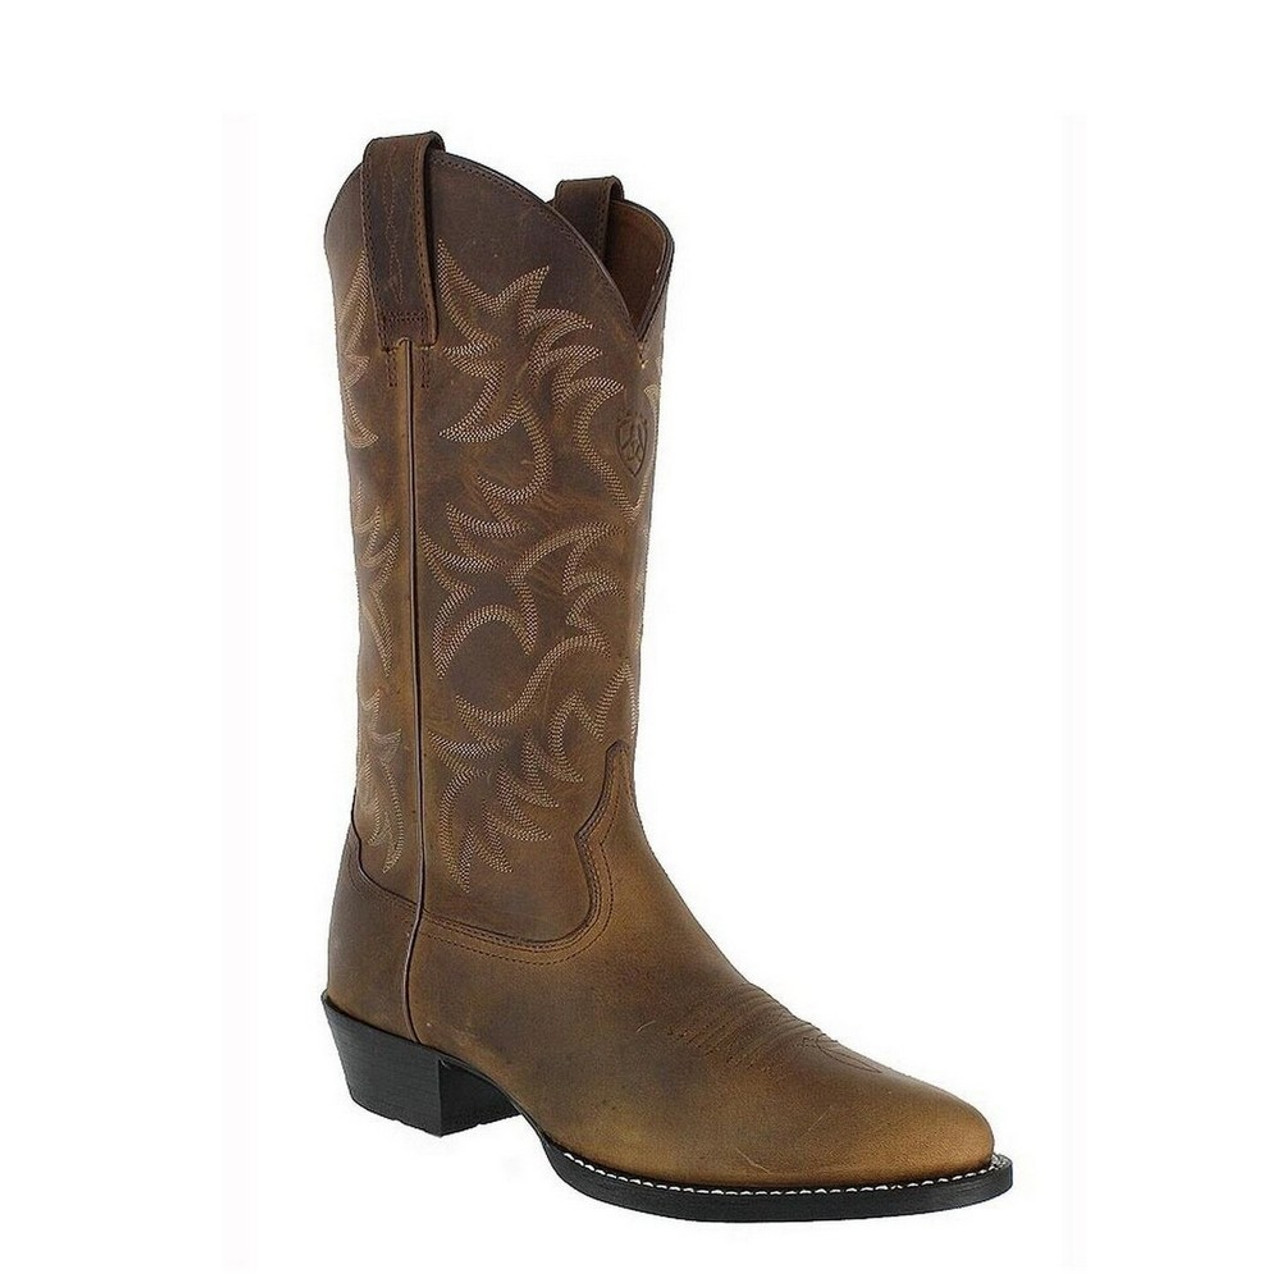 Men's Heritage Western Round Toe Boots